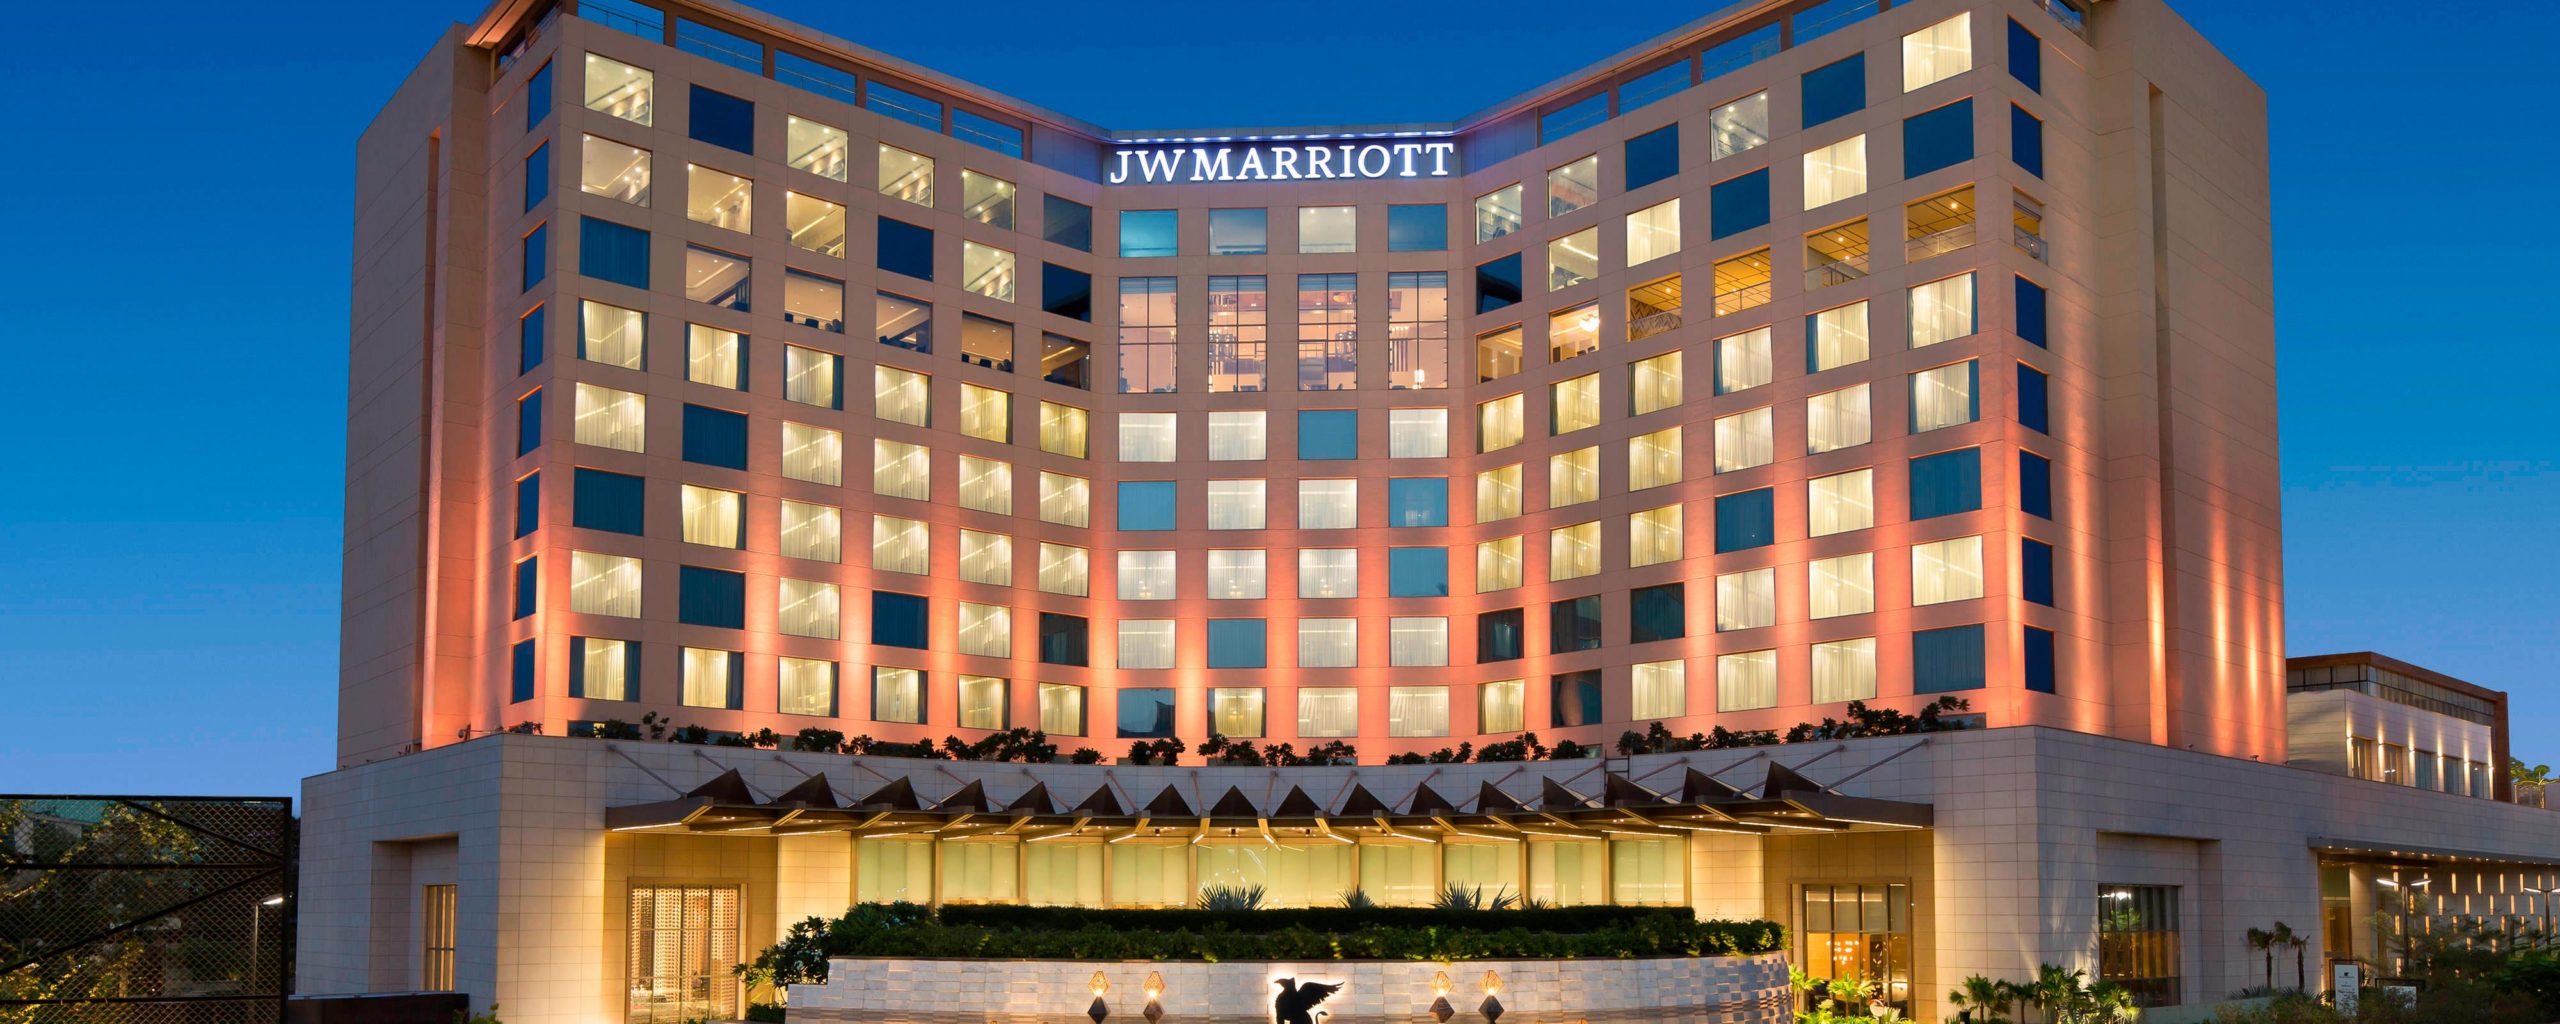 Marriott Hotel Chains, hotel chains in india